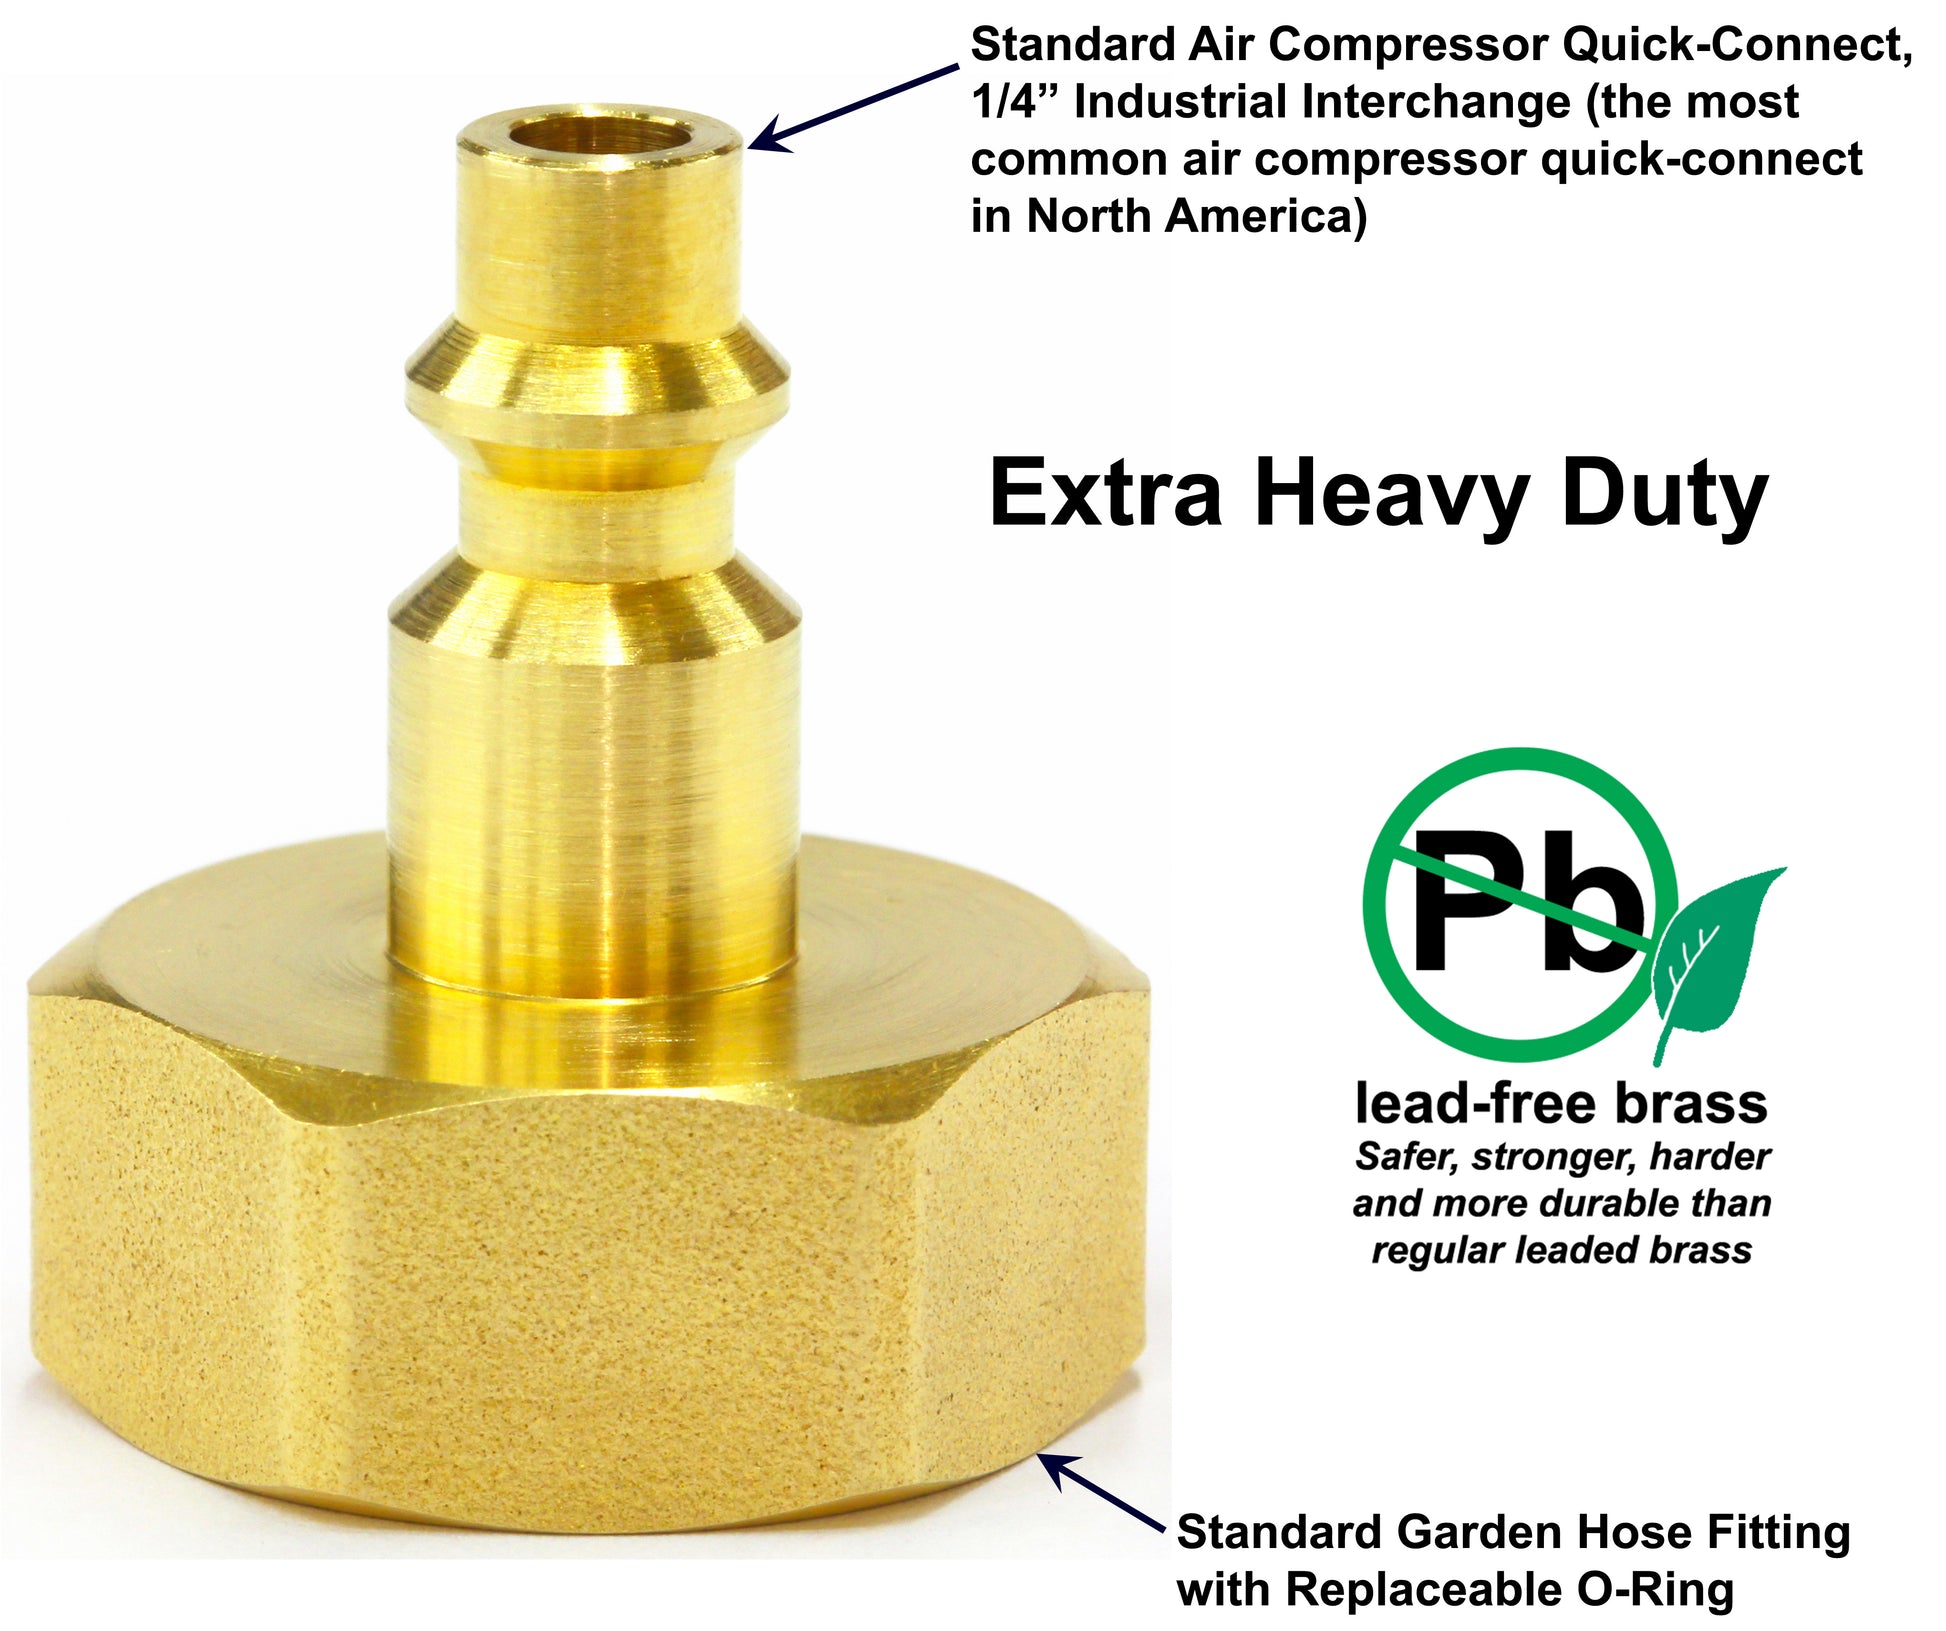 Winterize Sprinkler Systems And Outdoor Faucets: Air Compressor Quick-Connect Plug To Female Garden Faucet Blow Out Adapter Fitting (Solid Lead-Free Brass)